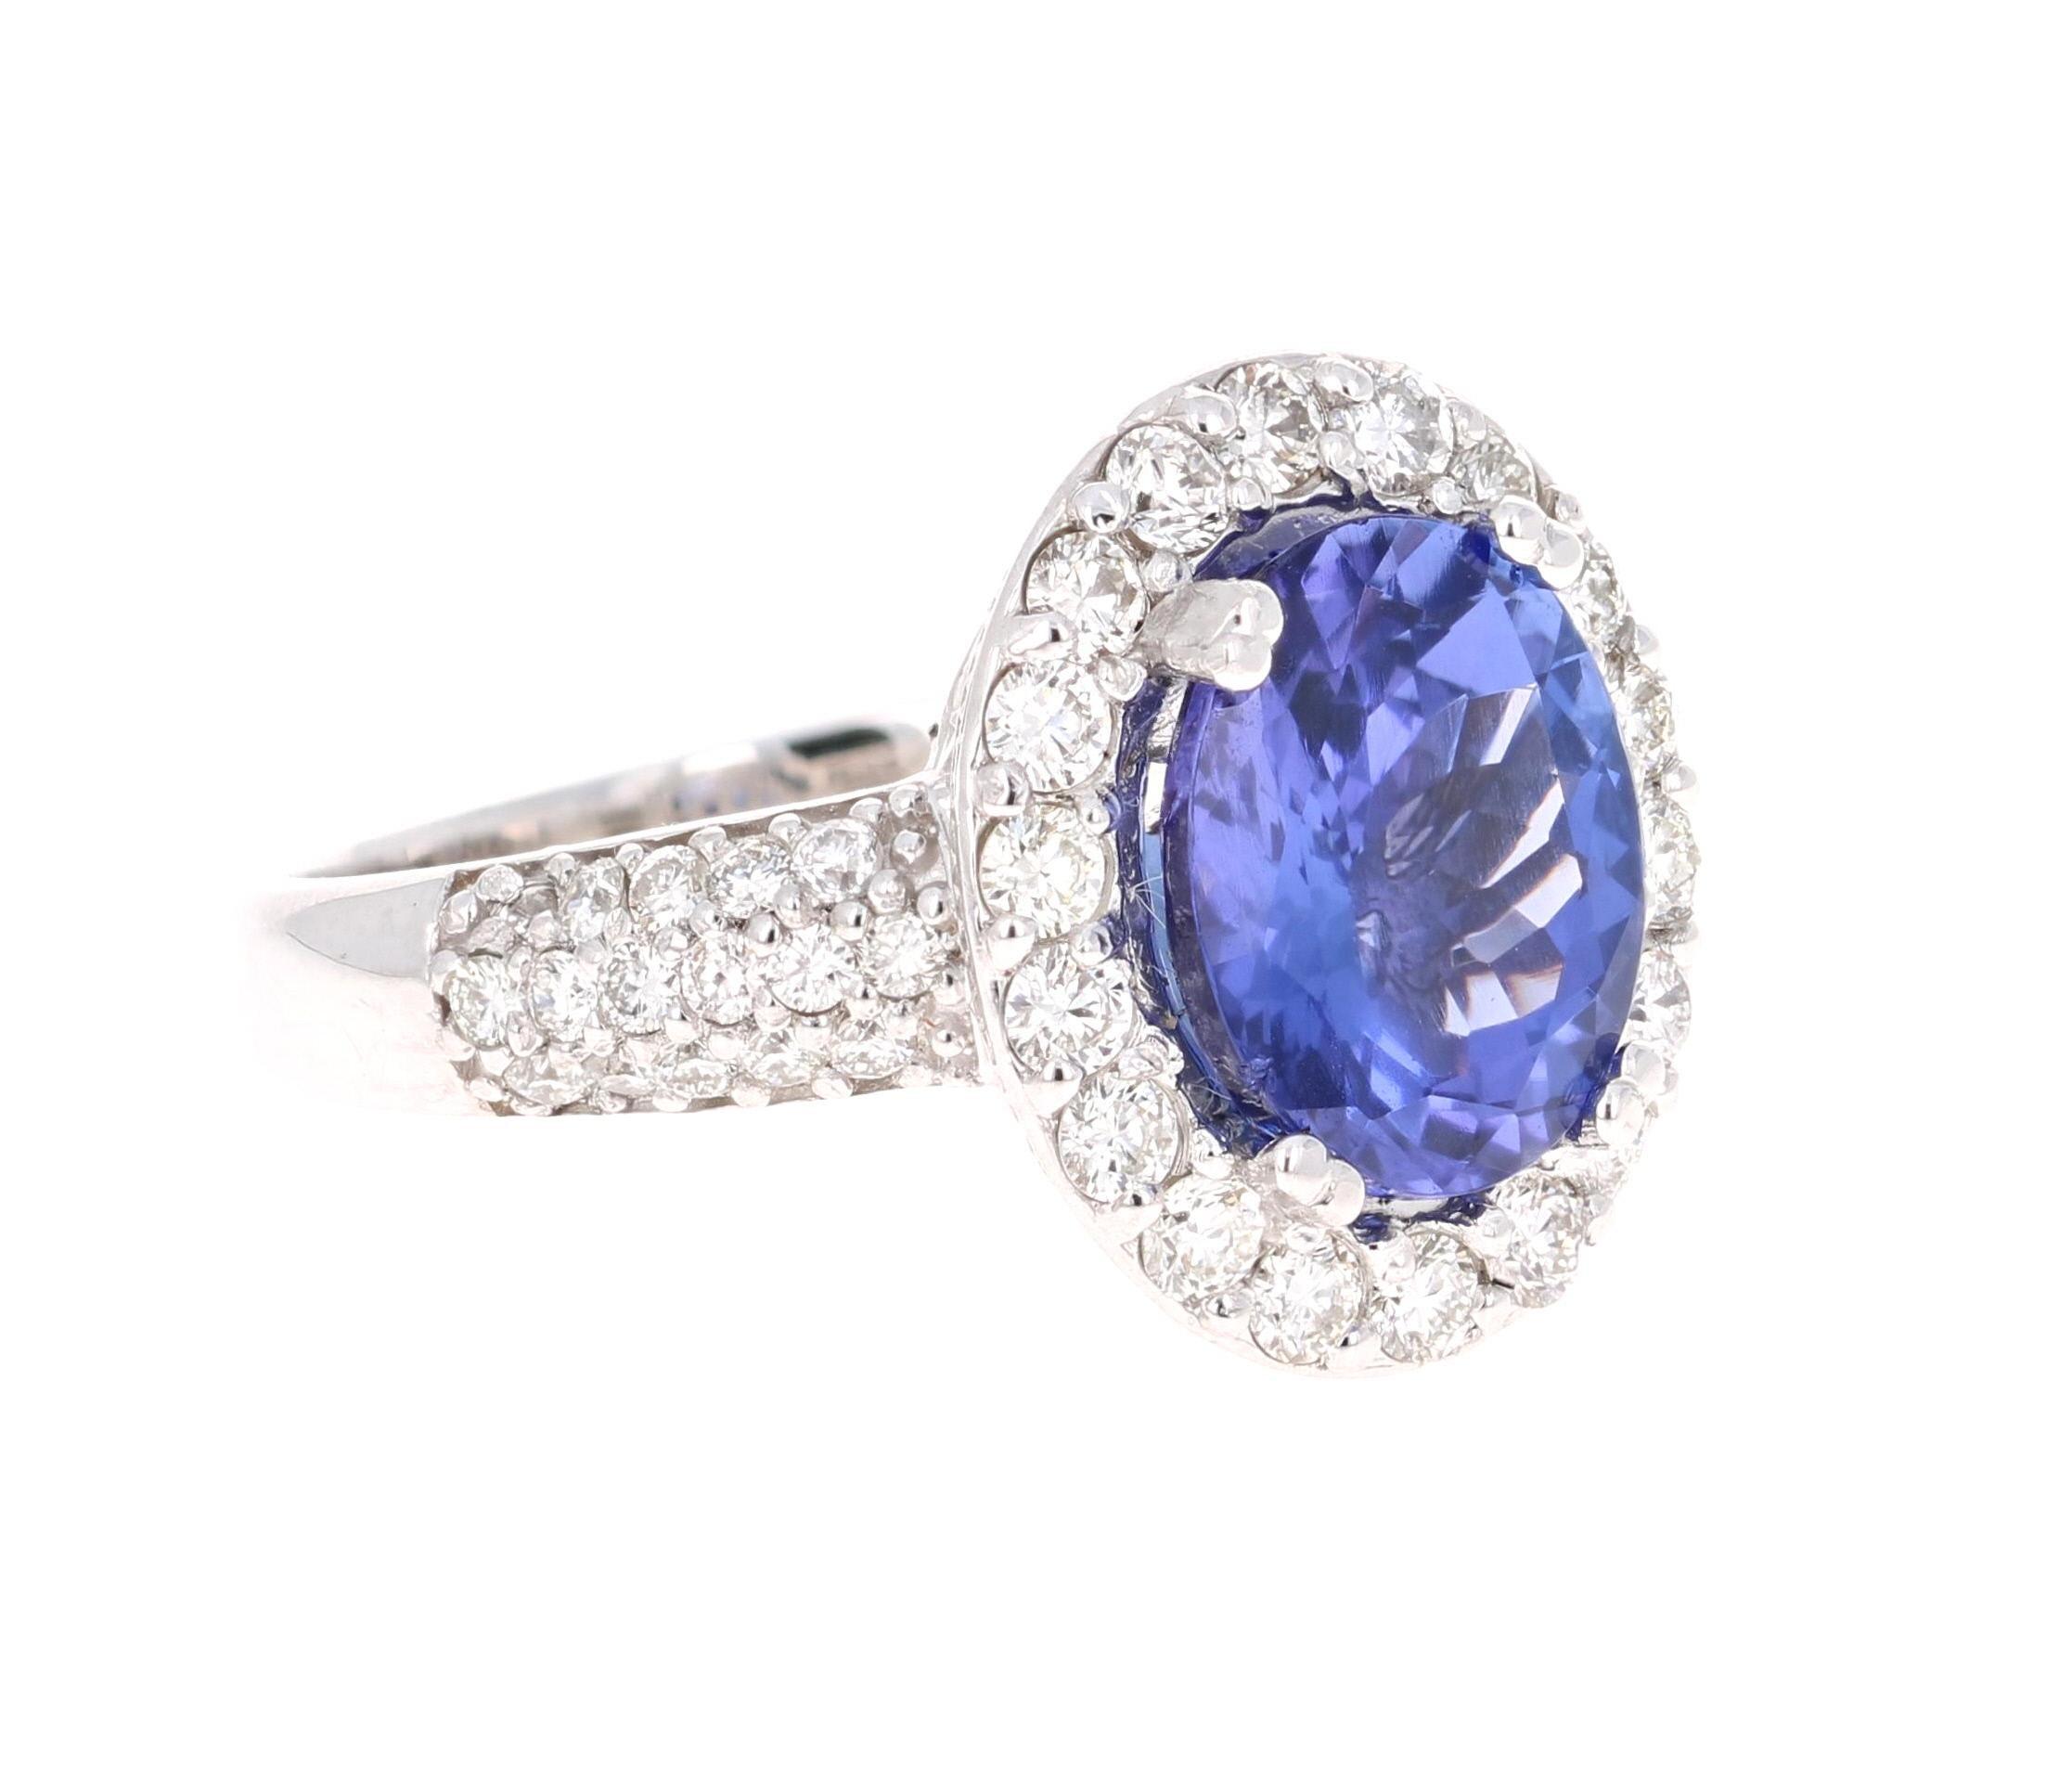 Elegant & Classic Tanzanite Diamond Ring! 

This ring has a radiant bluish-purple Oval Cut Tanzanite weighing 3.30 Carats. It is surrounded by 62 Round Cut Diamonds that weigh 1.04 Carats with a clarity and color of VS-H. The total carat weight of